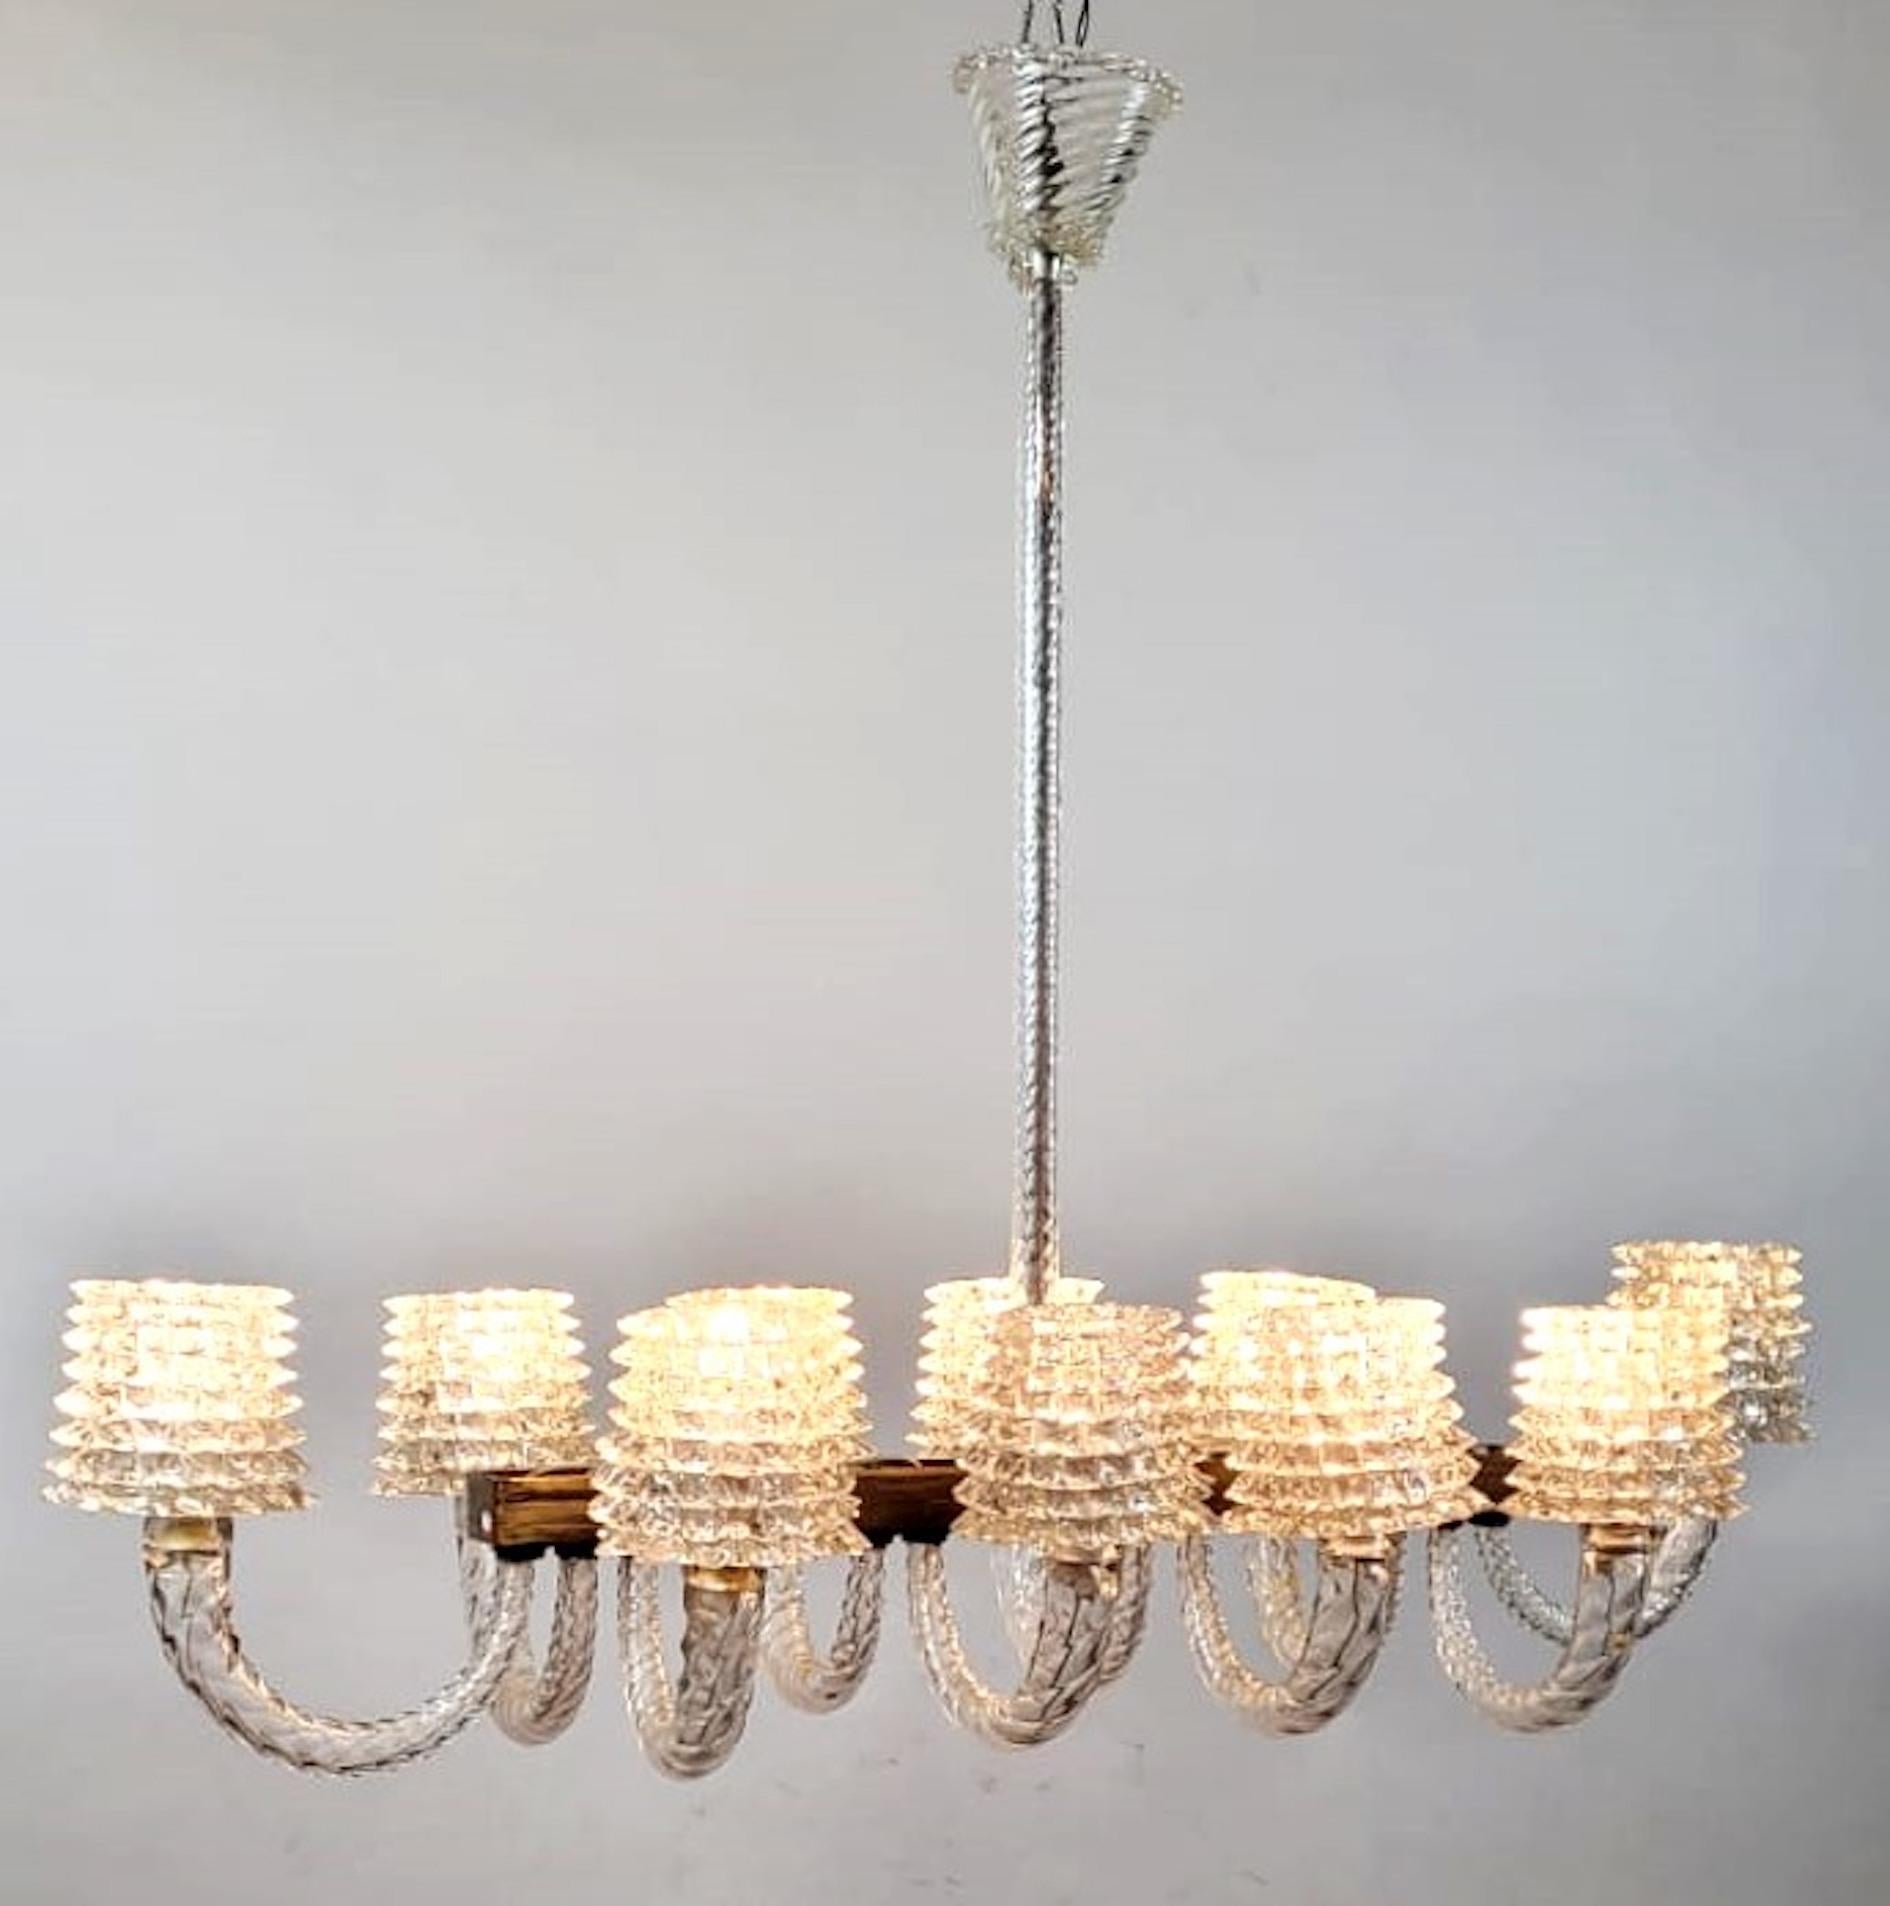 Italian Large Barovier And Toso Chandelier - Murano - 10 Sconces For Sale